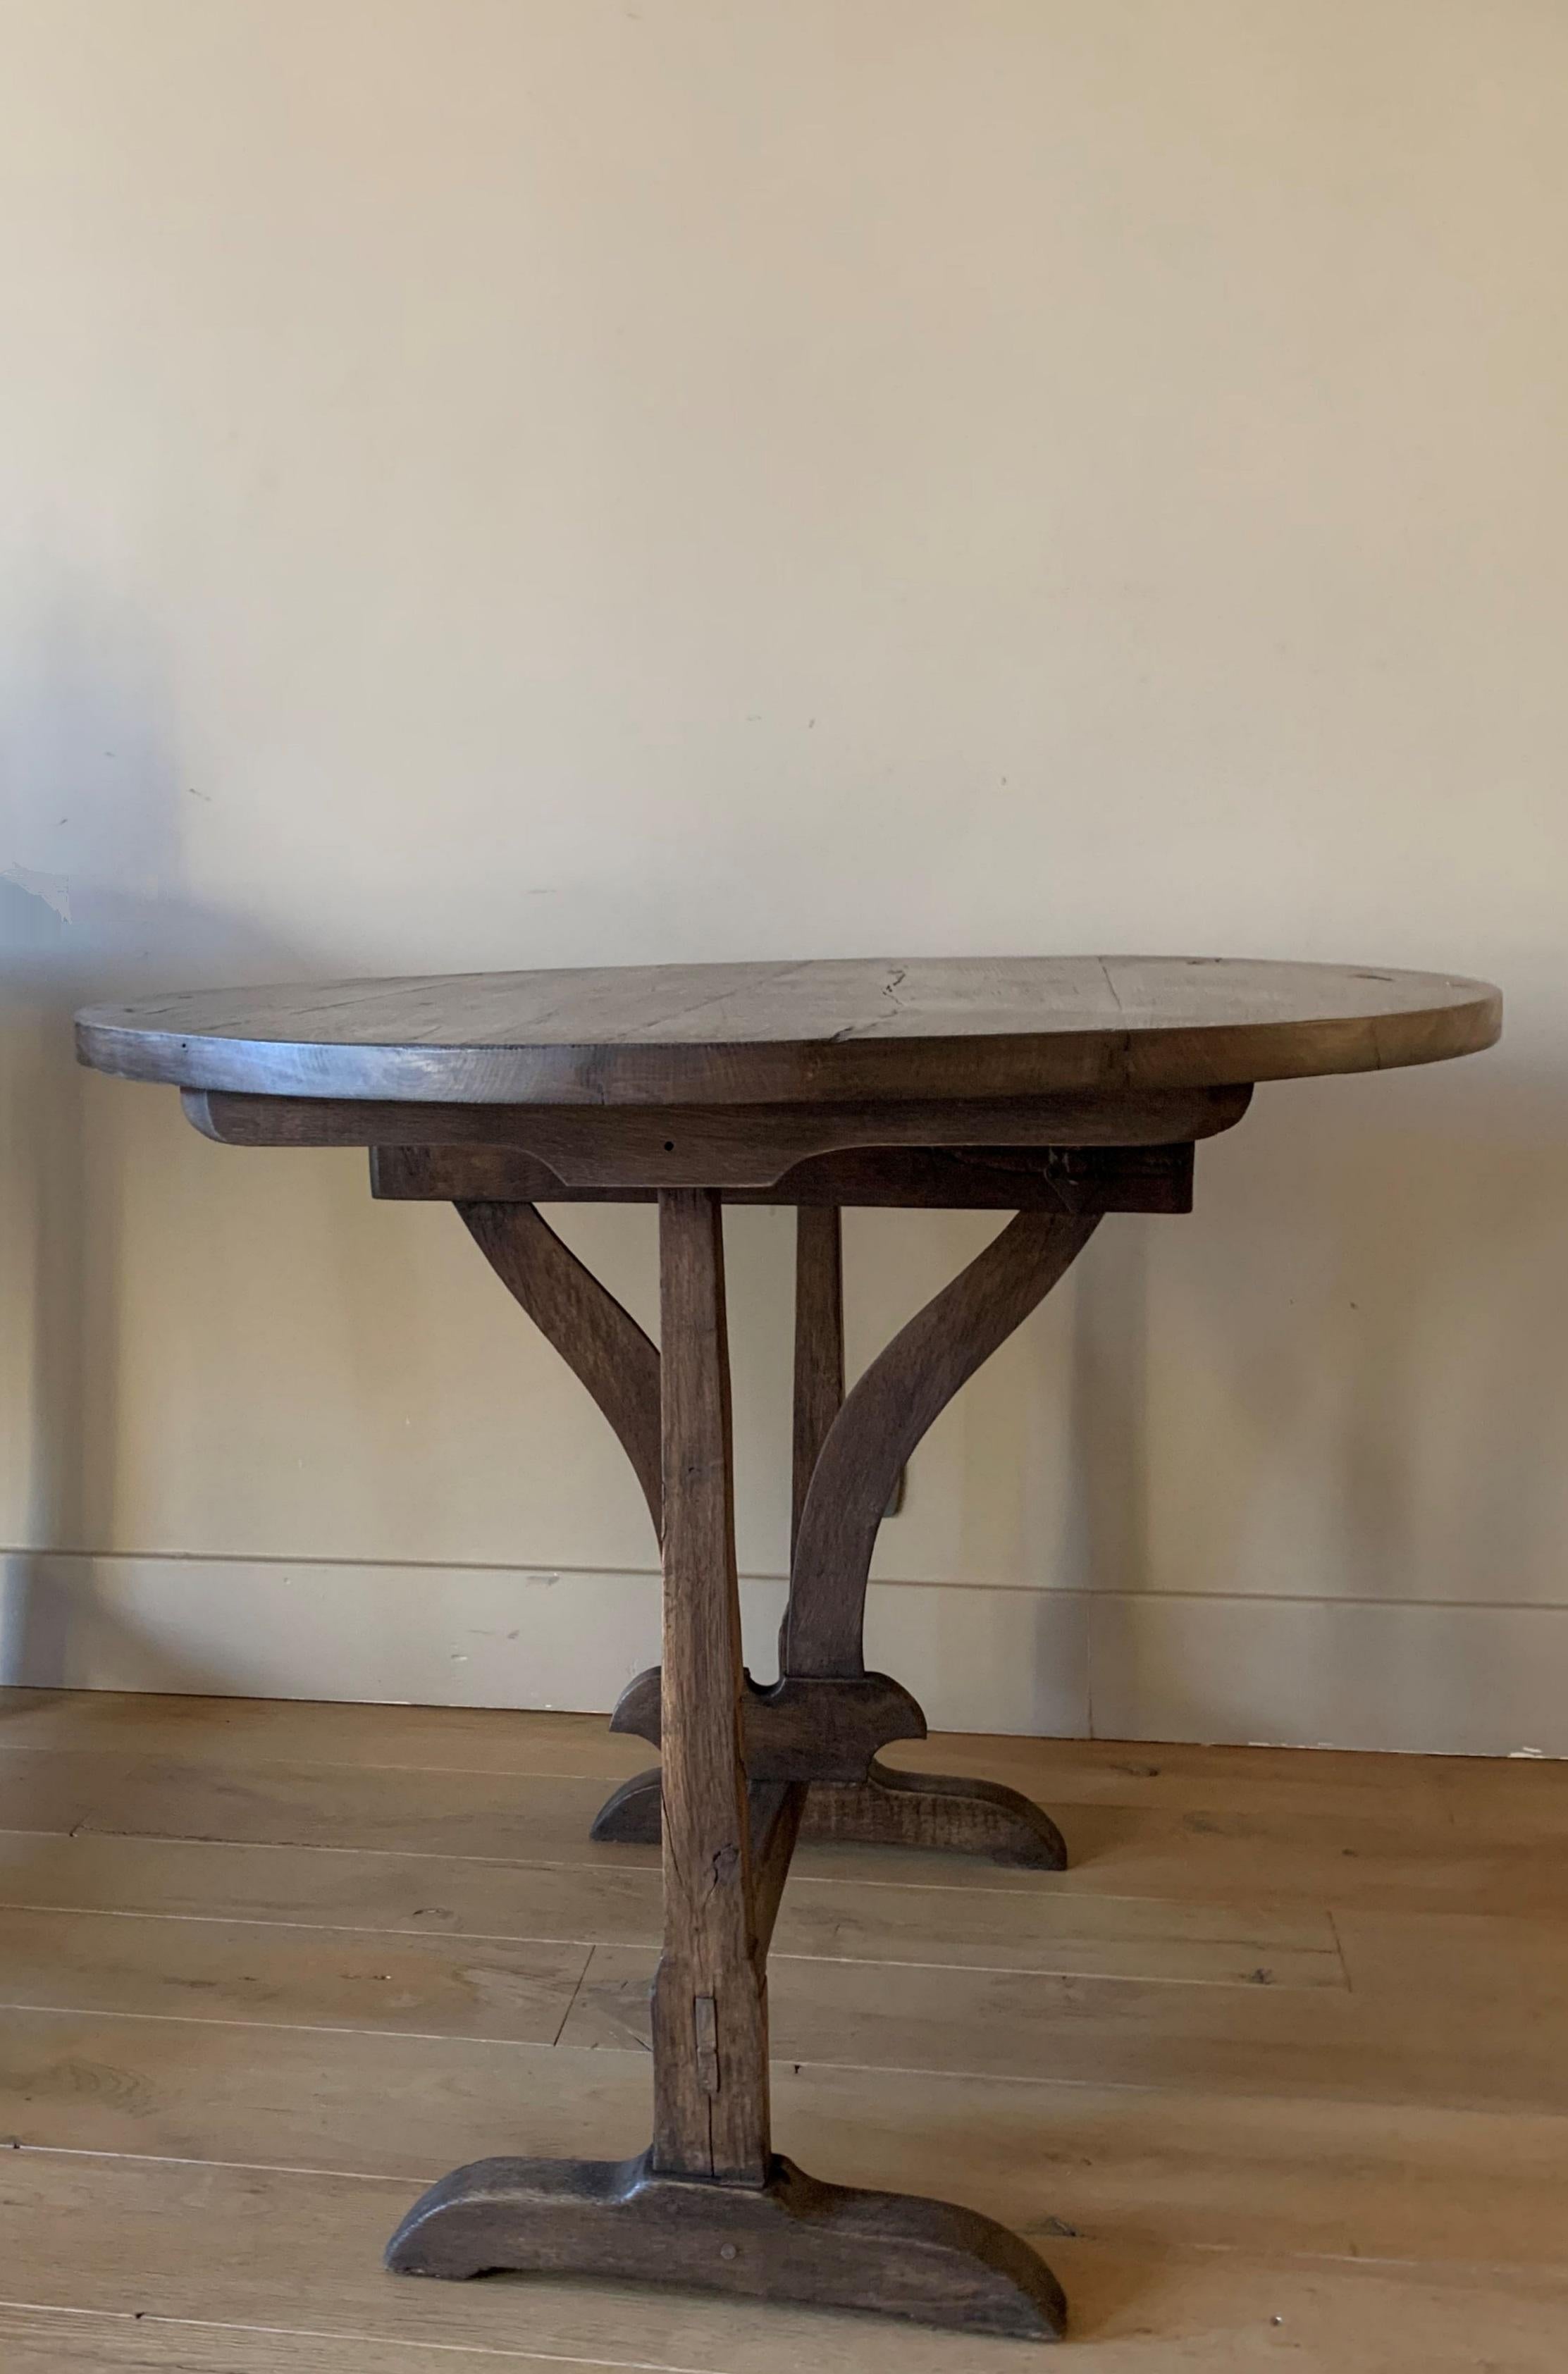 A good 19th century French Winetable. The oak top folds on the oak base.
These Vigneron tables were and are used on the French countryside as occasional tables in winecellars and on the field. Often made by farmers in the wintertime they are